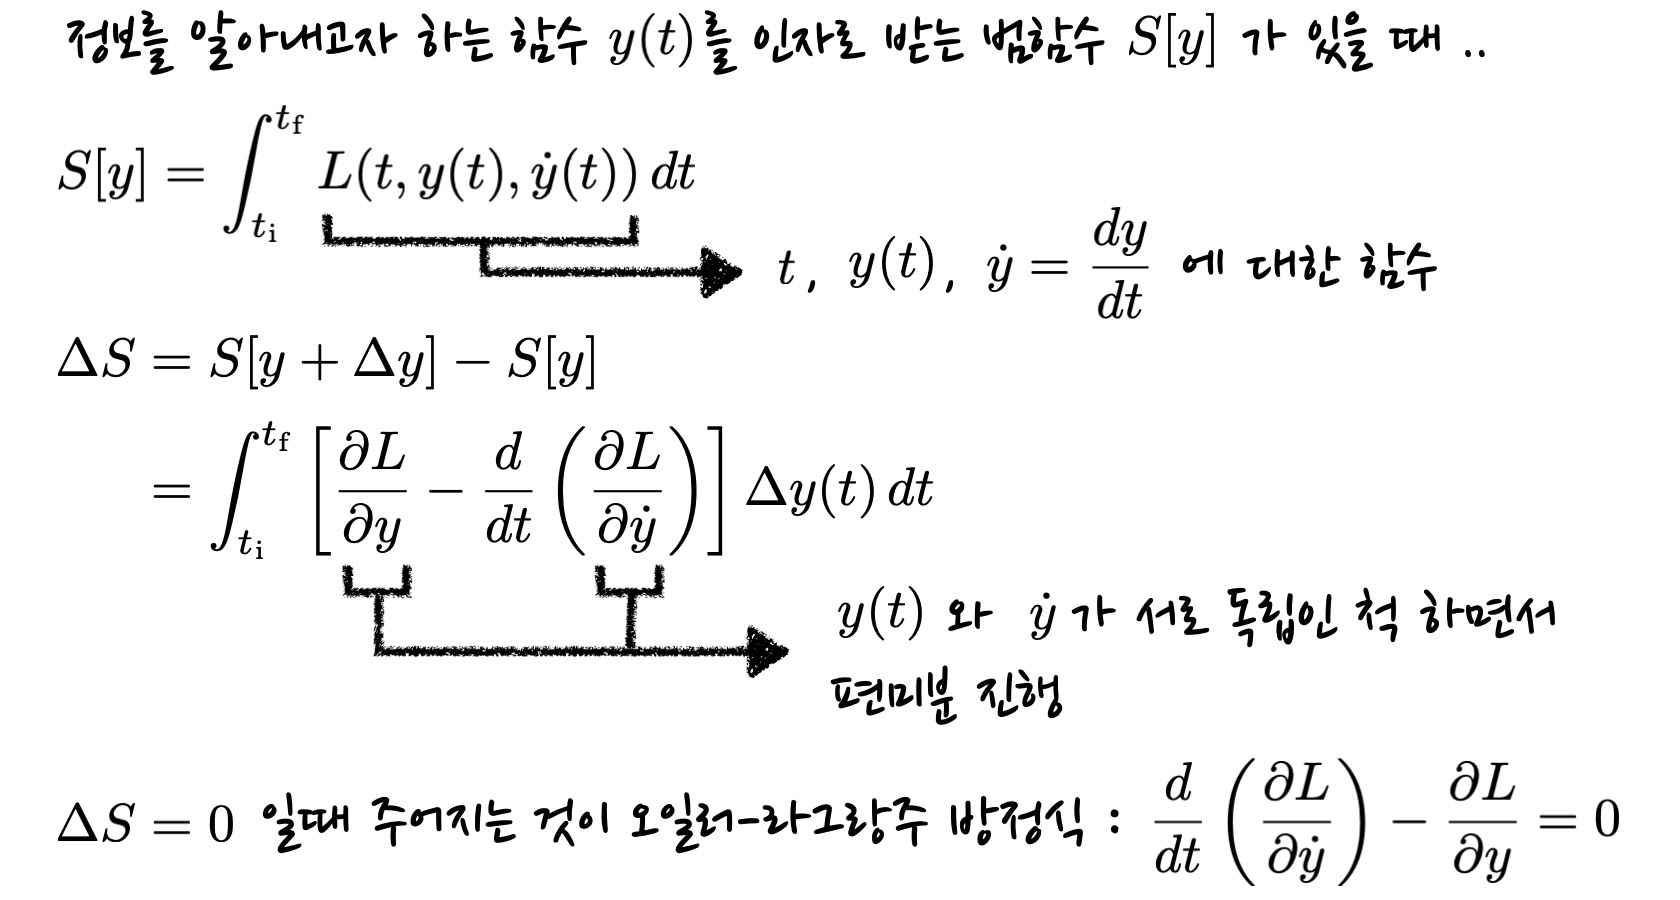 definition and derivation of Euler-Lagrange equation, which is given in terms of the integrand of the functional